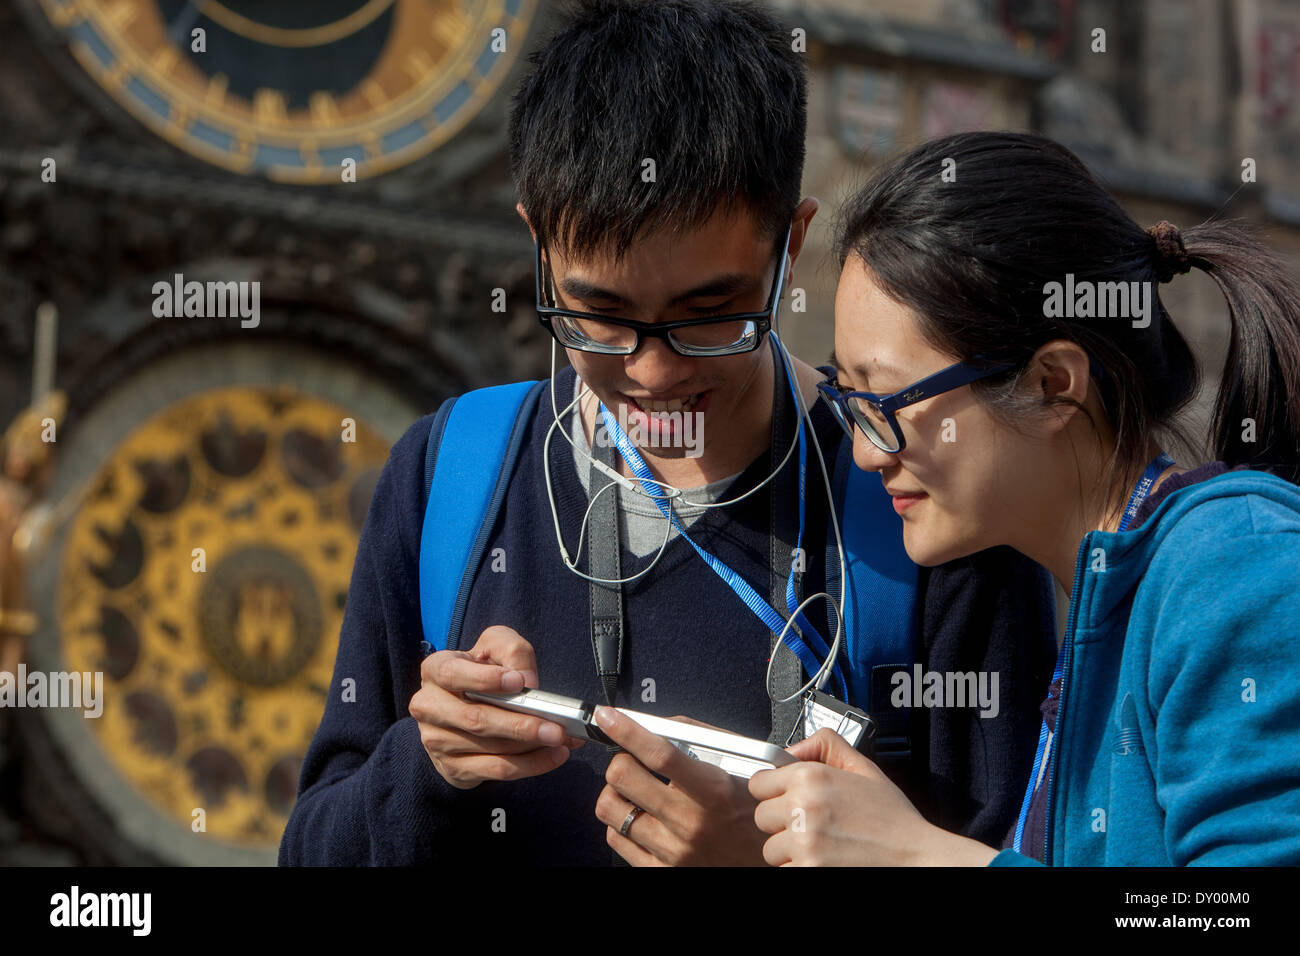 Young Asian tourists couple sightseeing at the Prague Astronomical Clock Stock Photo